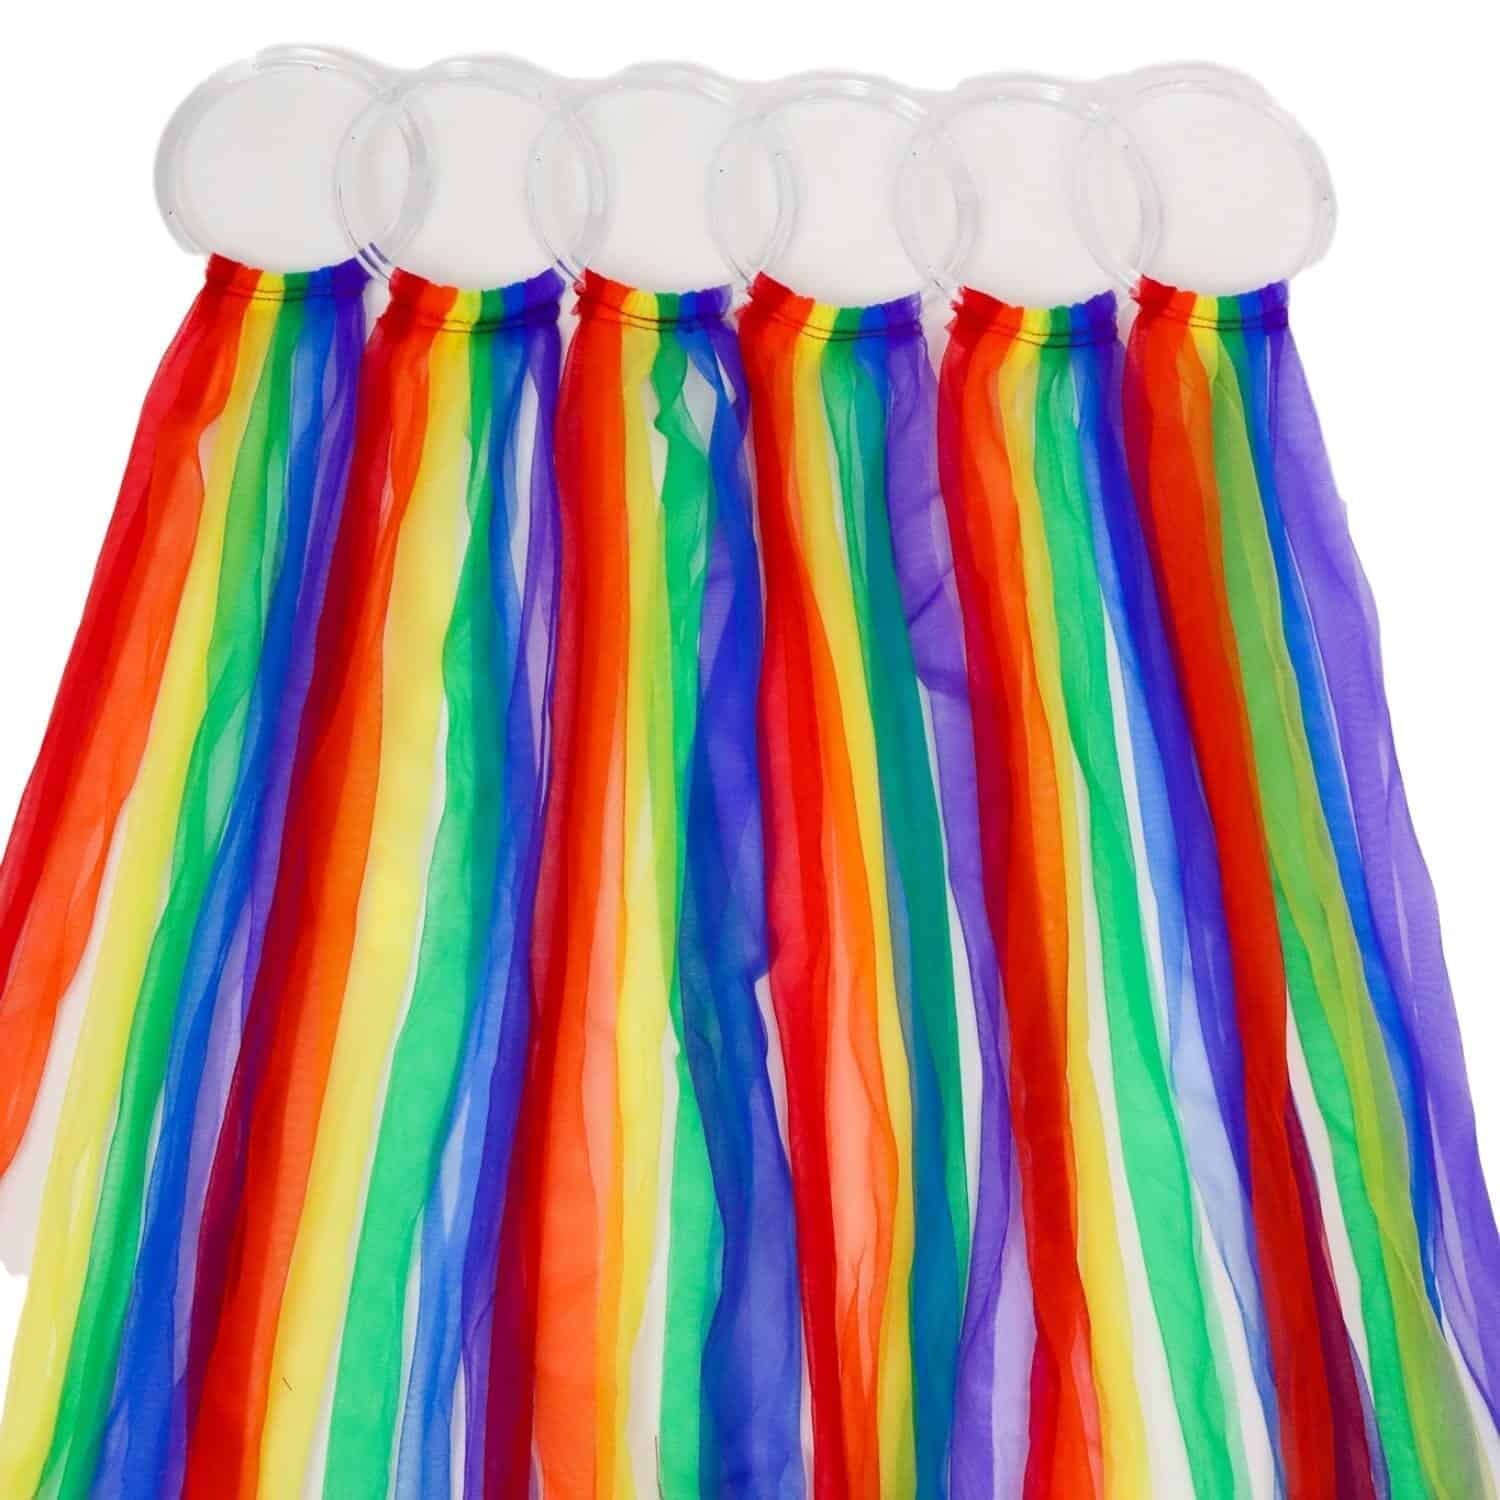 Set of 6 Hoops with 24 Chiffon Scarf Streamers in Rainbow with Storage Bag, Creative Movement Prop for Dancing, Preschool, Music Education. Direct